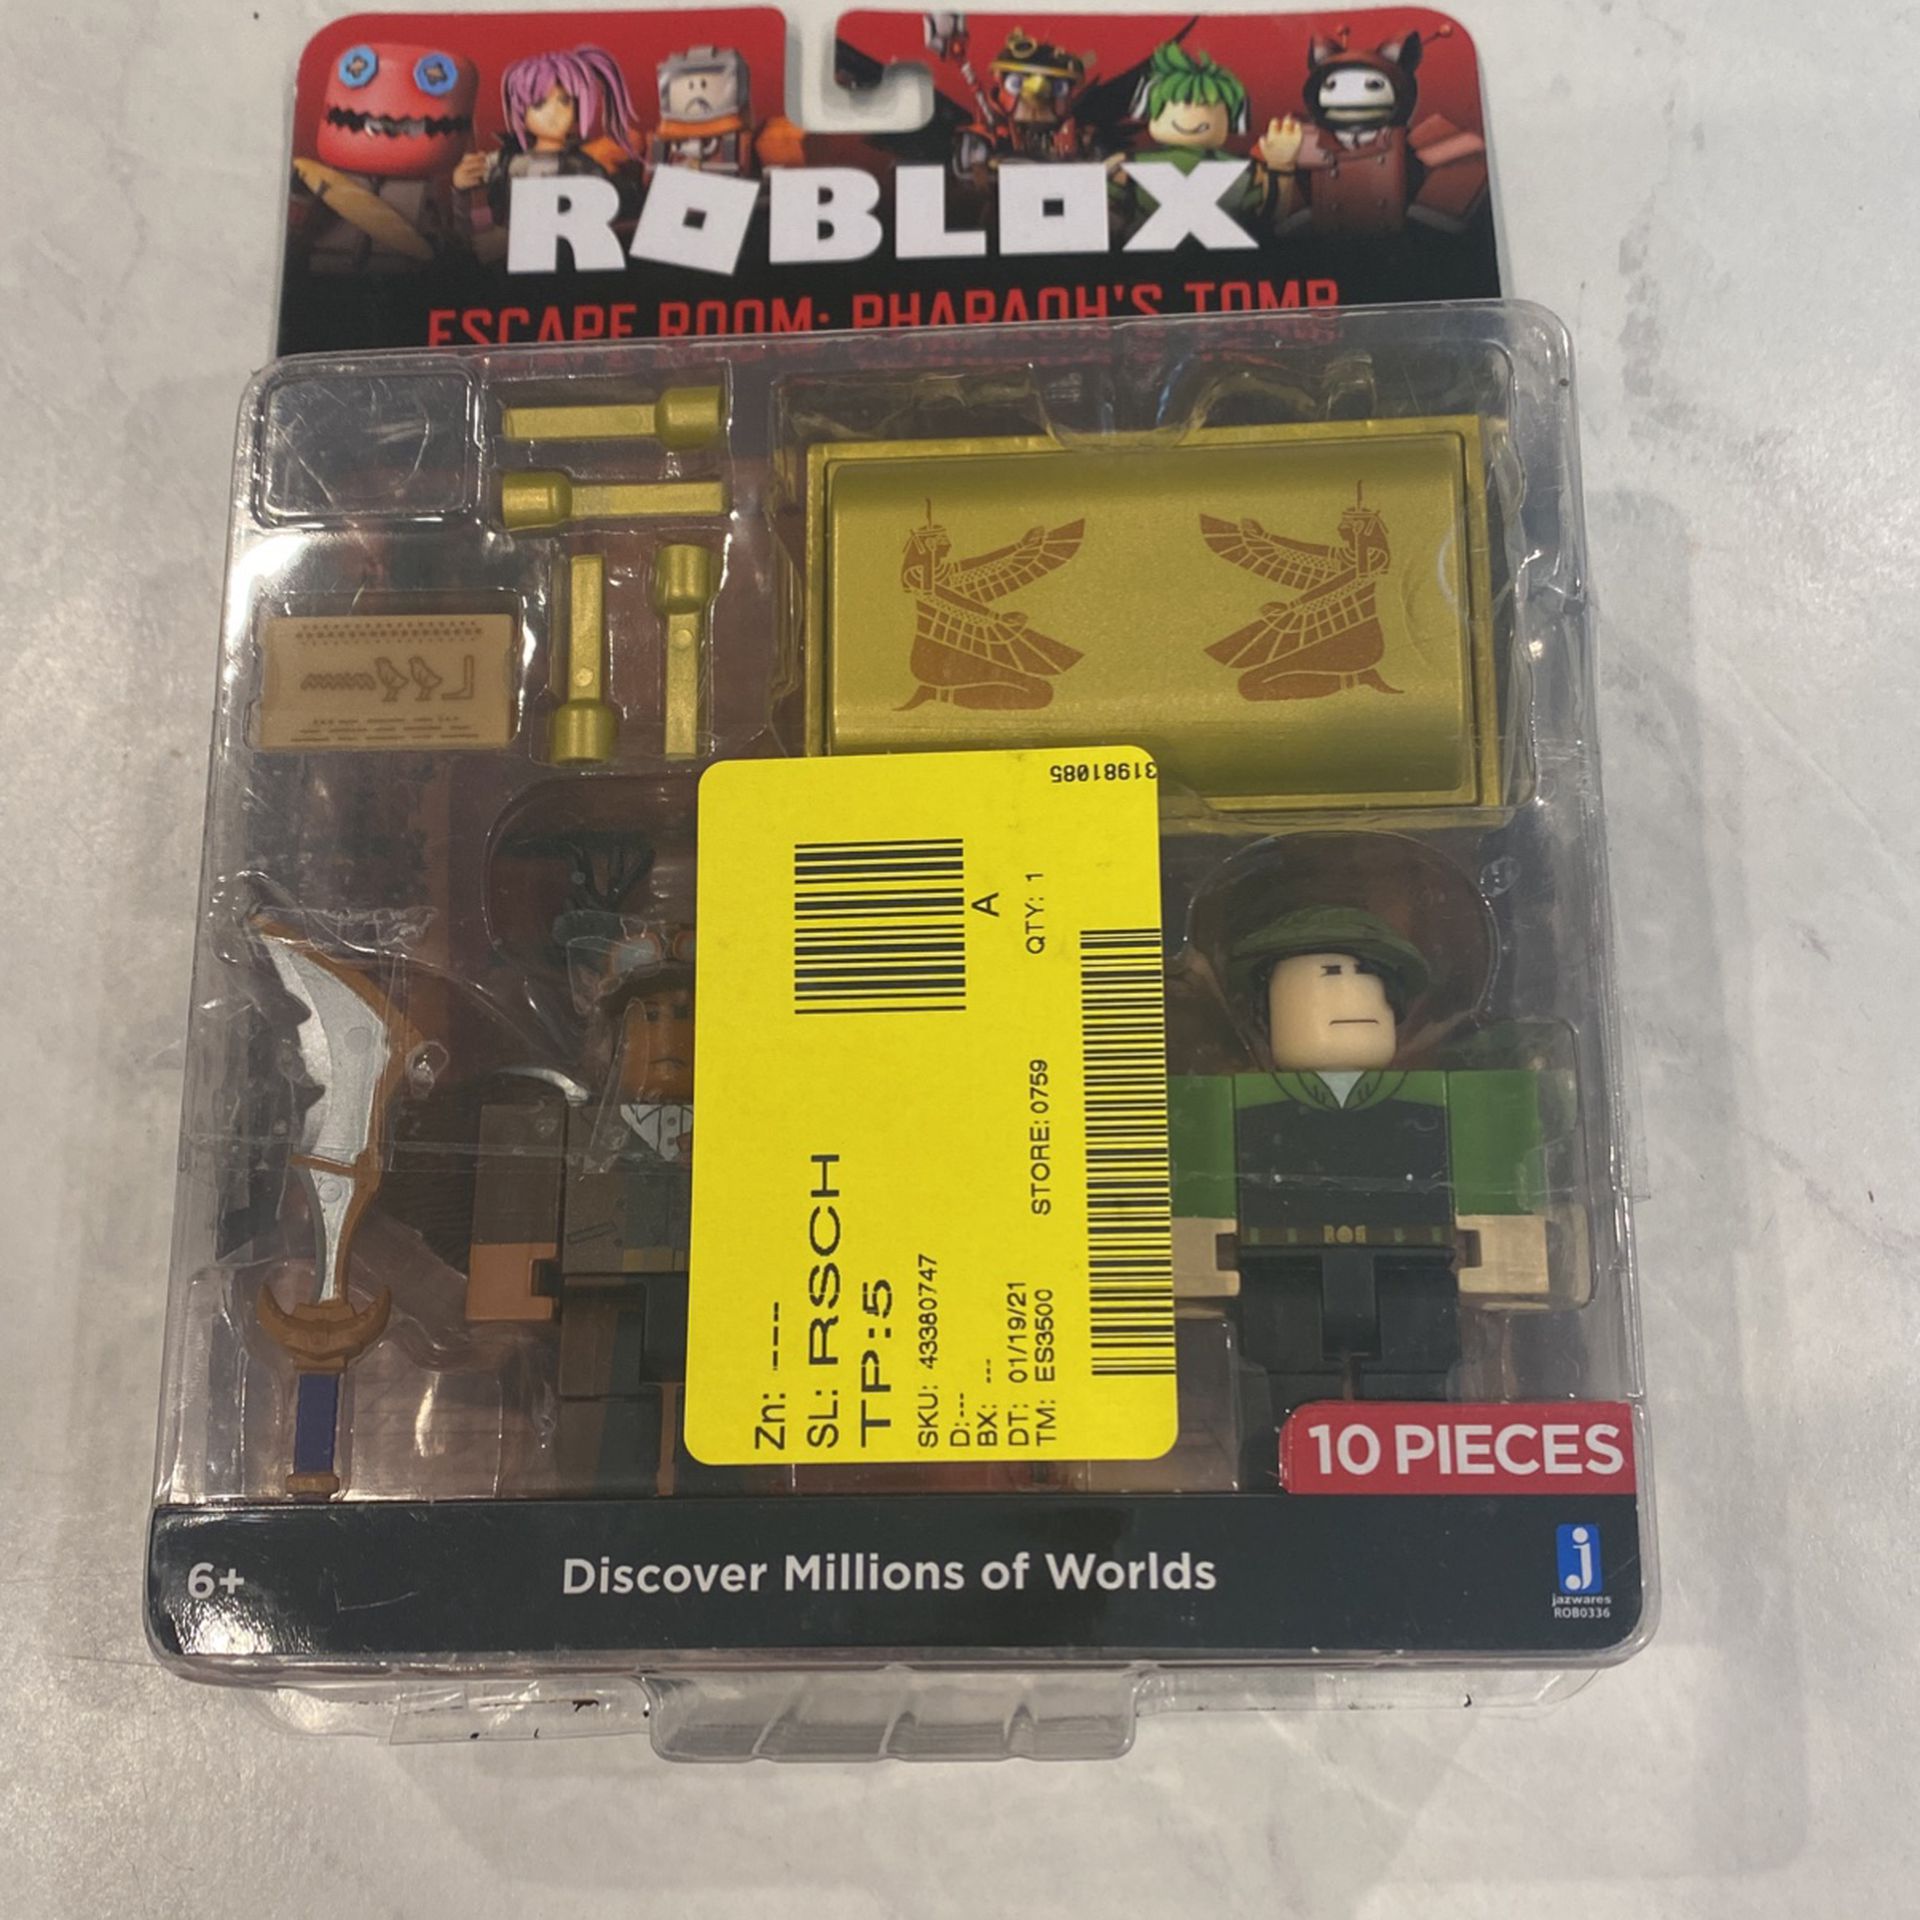 Roblox Action Collection - Escape Room: The Pharoah's Tomb Game